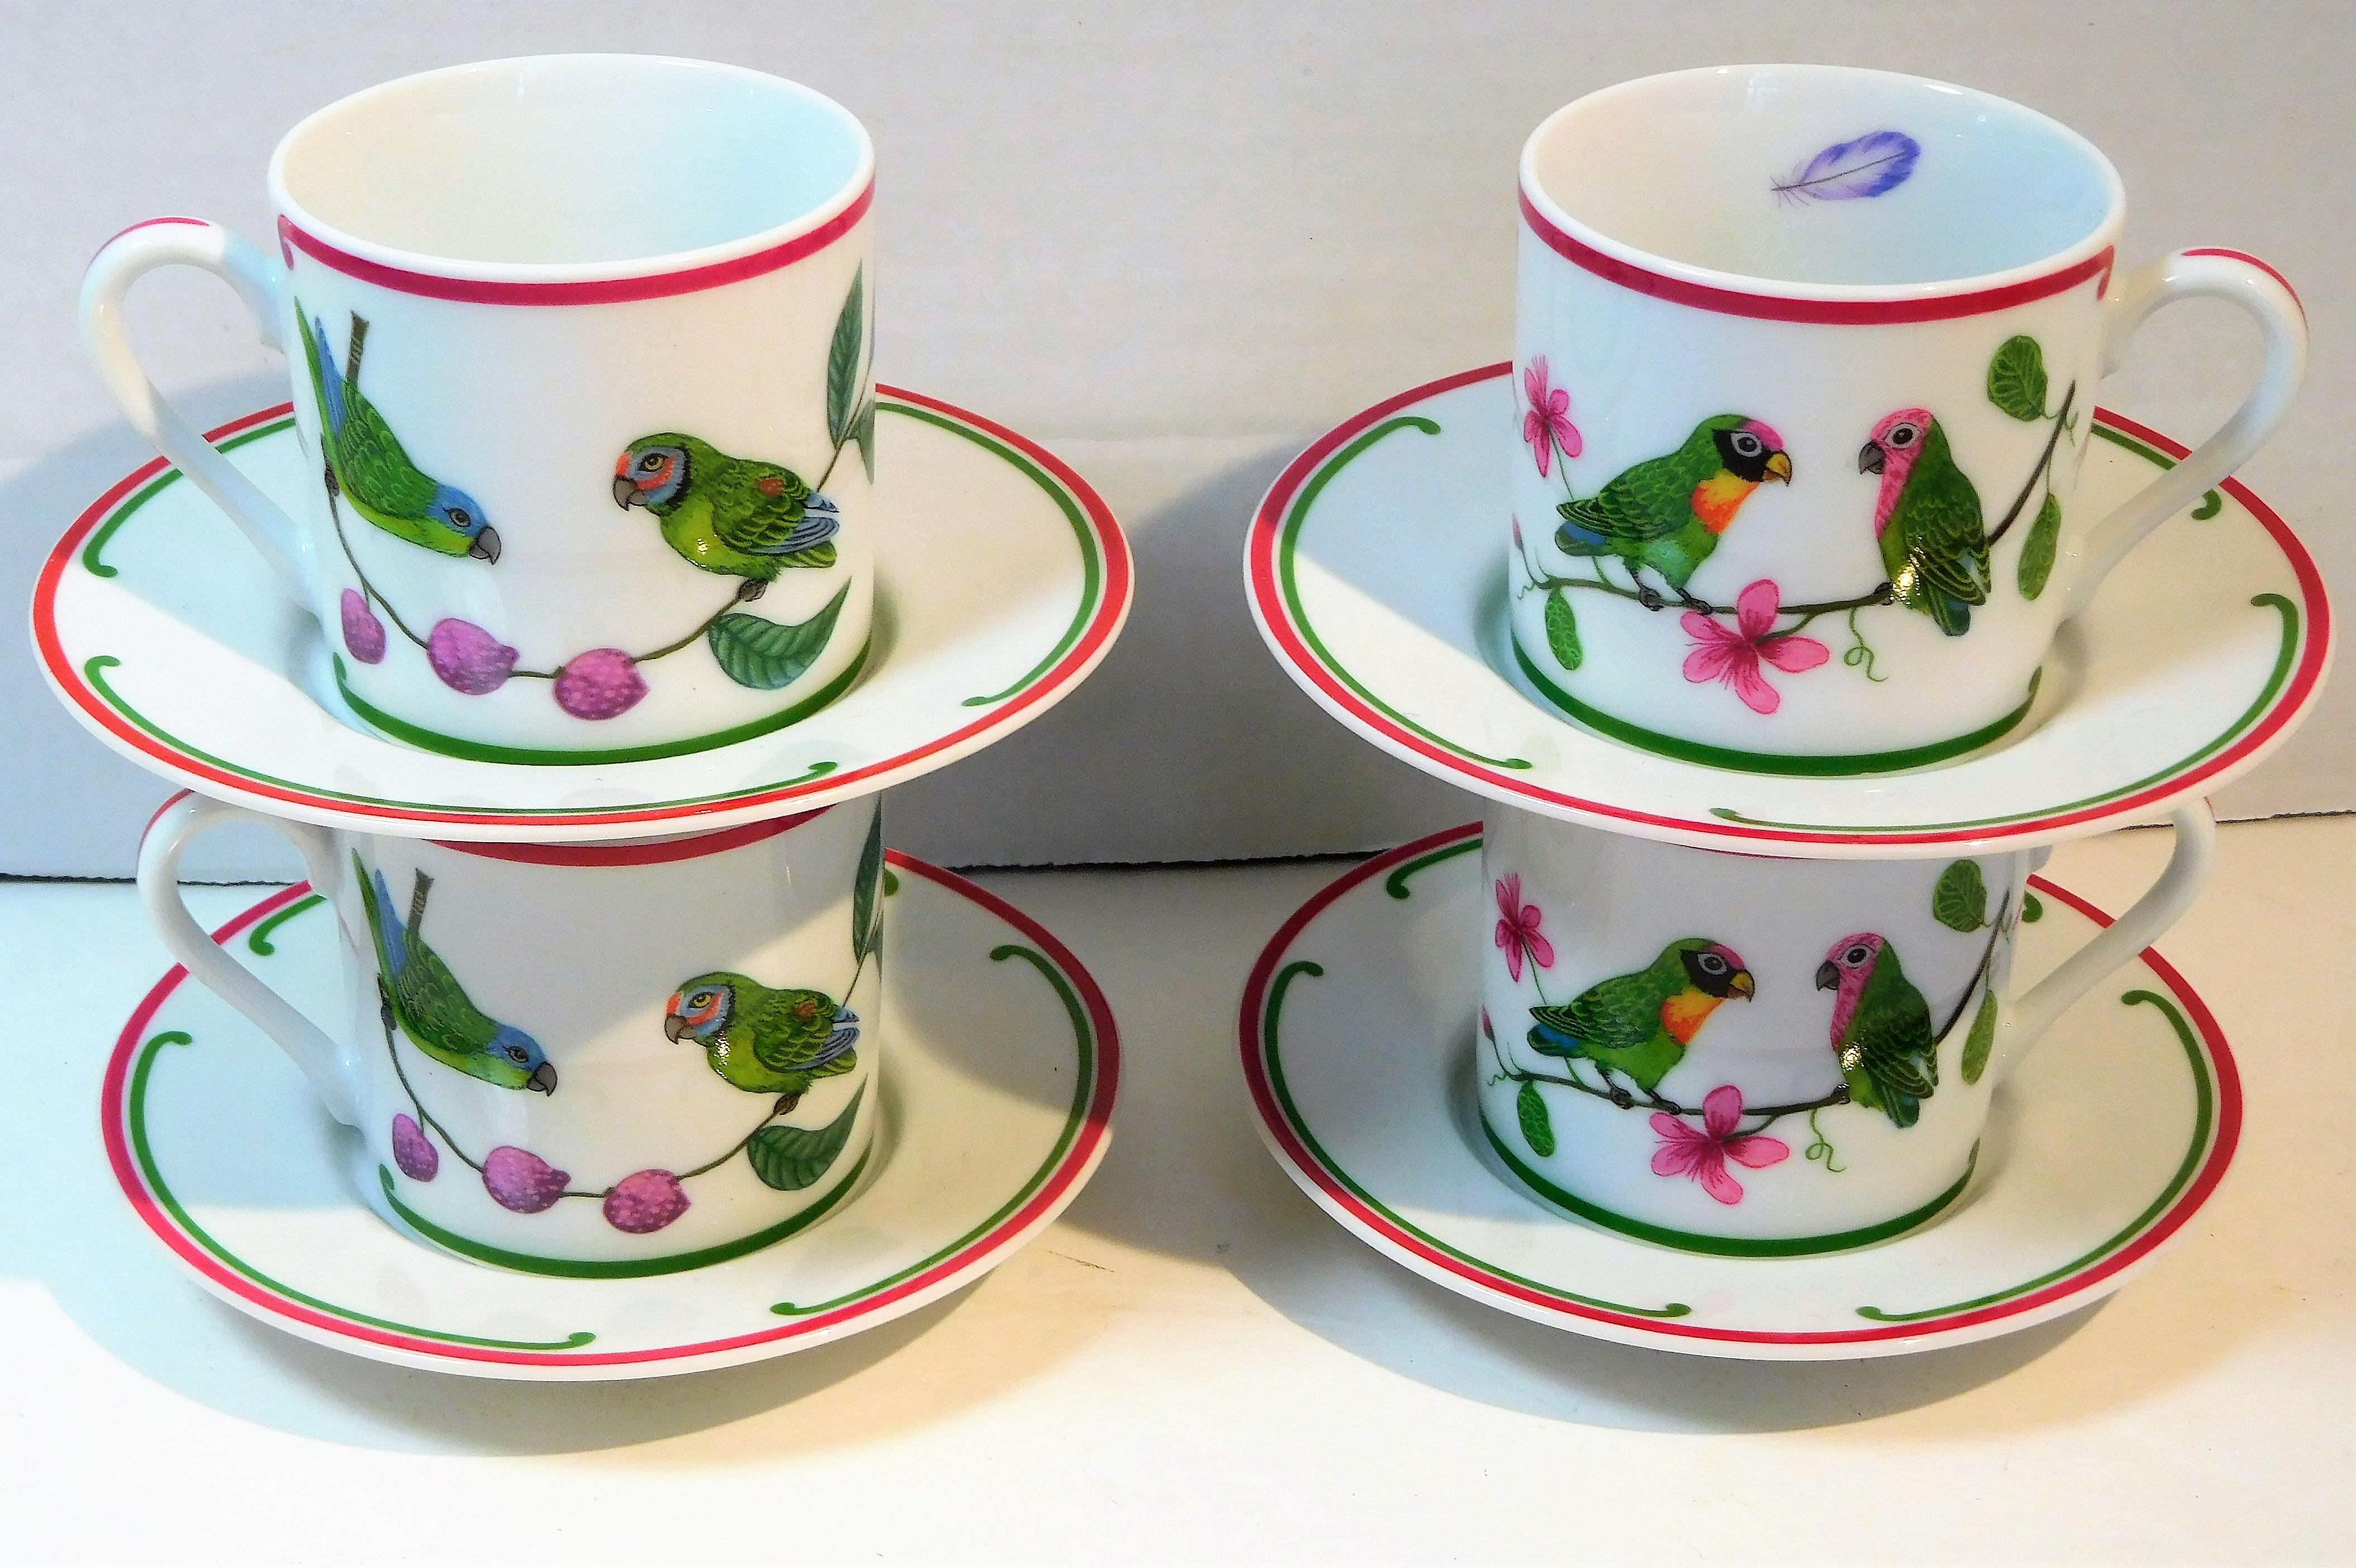 This colorful set of four porcelain demitasse cups and saucers ( 8 pieces total) was made by Lynn Chase Designs, Inc. of Massachusetts in 1989. The colors include green, fuchsia, orange, red, purple. blue and black on a white ground, so the colors